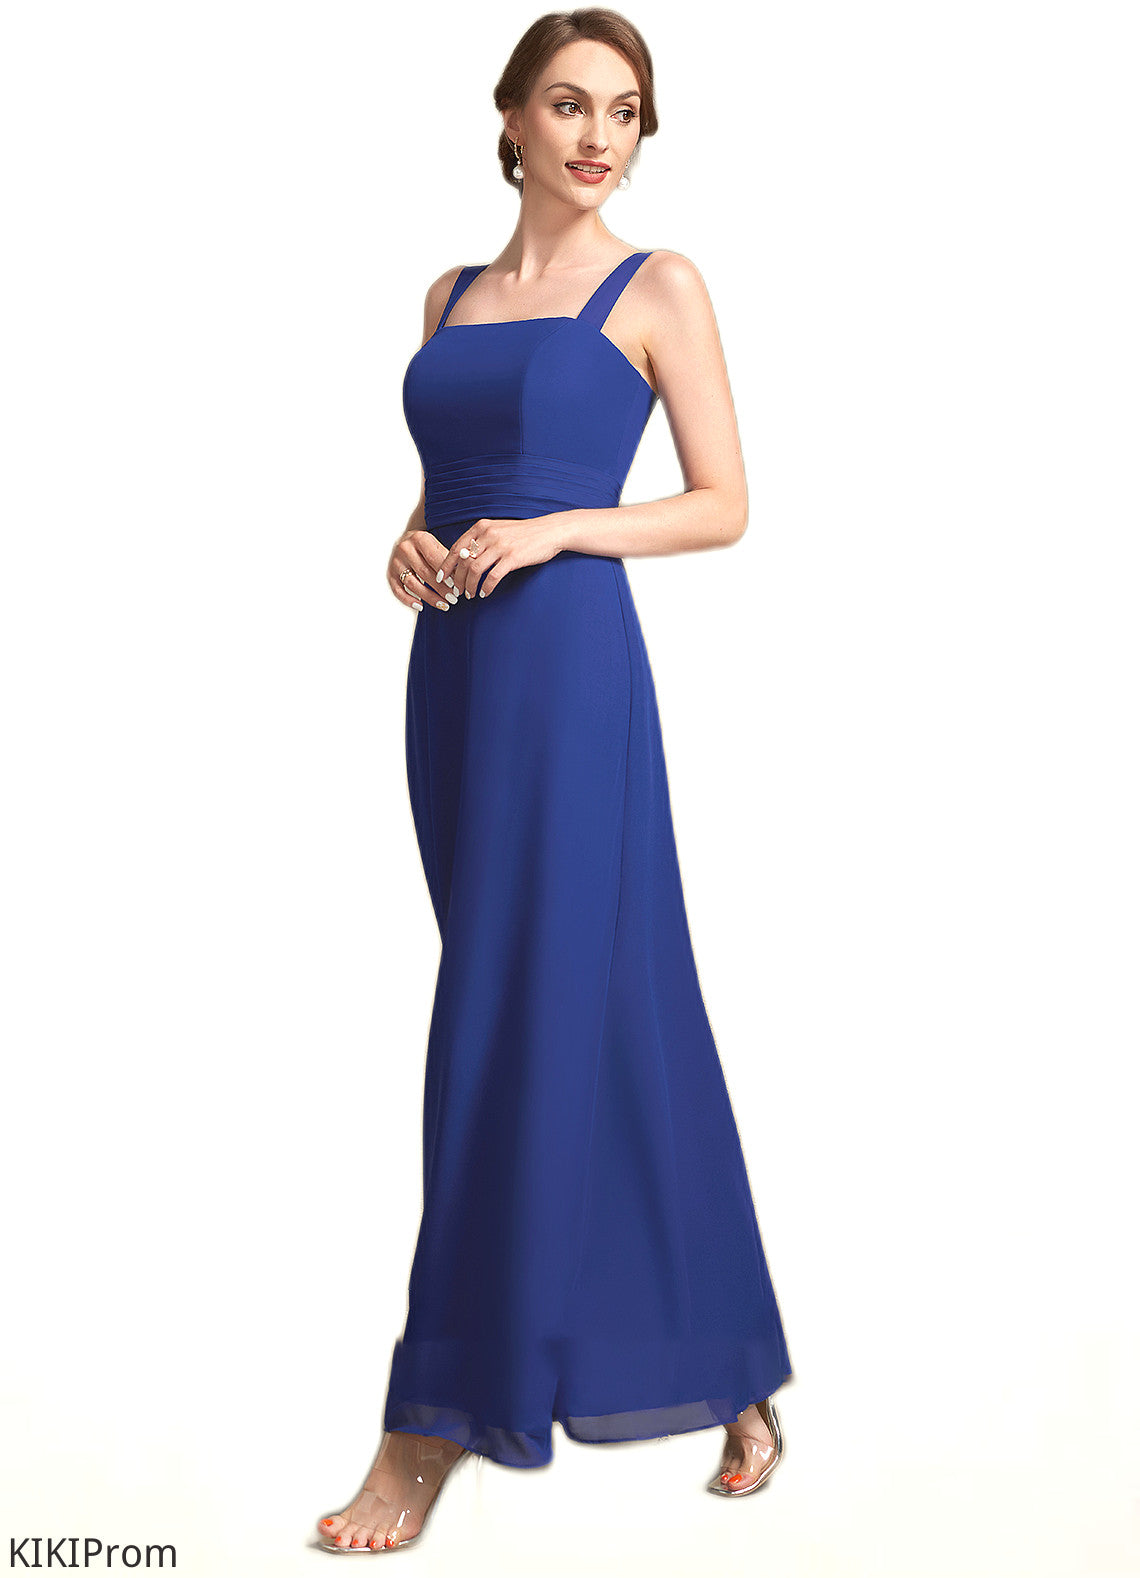 Serenity A-Line Square Neckline Ankle-Length Chiffon Mother of the Bride Dress With Ruffle DZ126P0014982